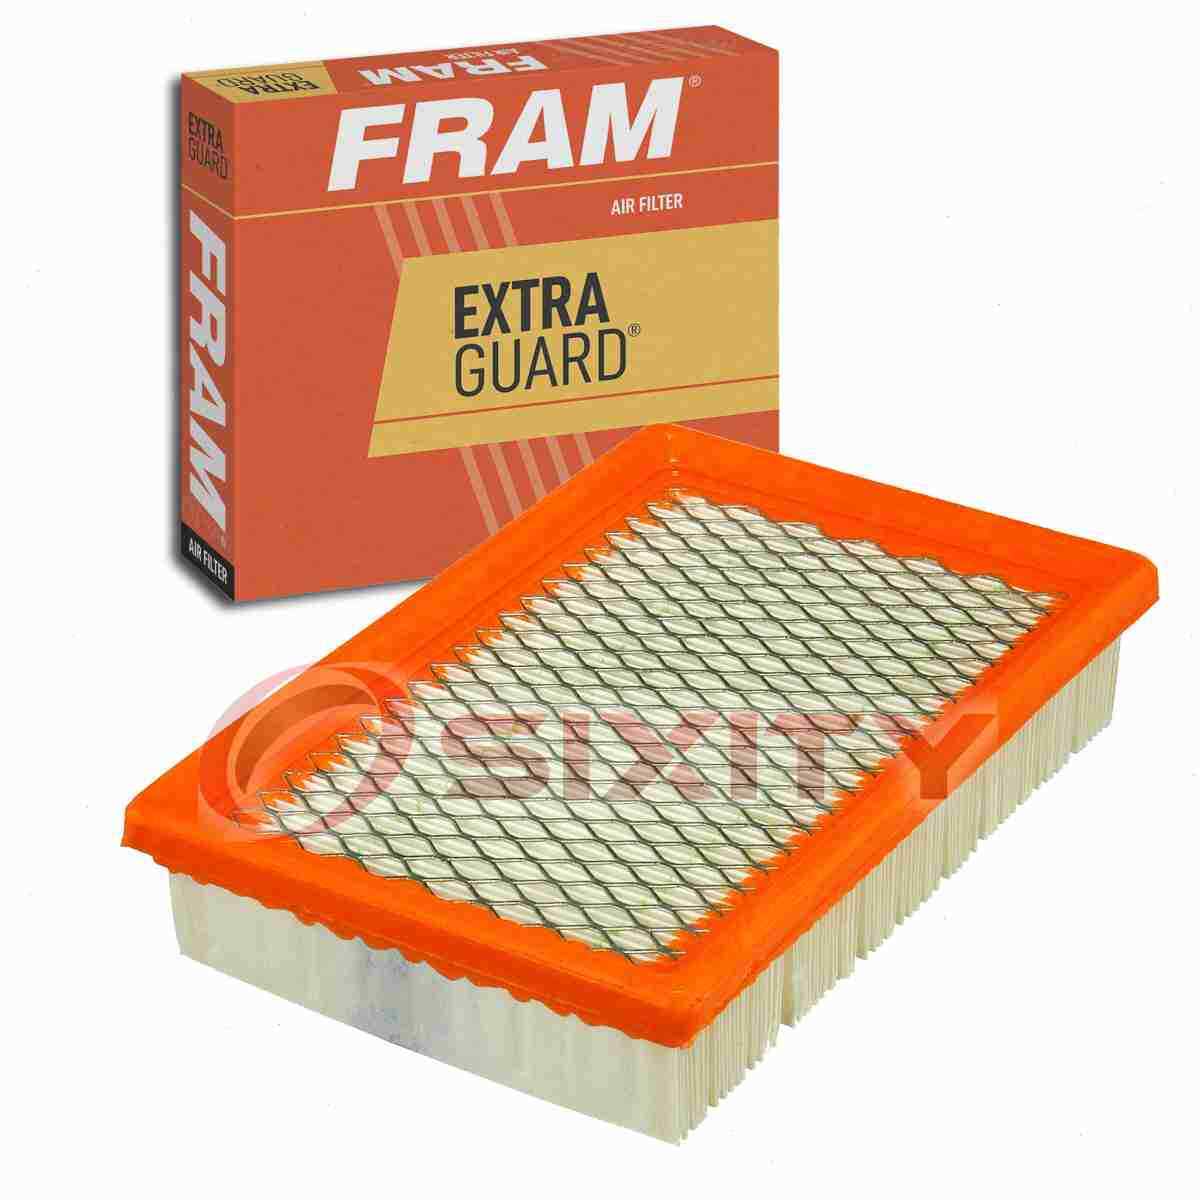 FRAM Extra Guard Air Filter for 1981-1985 Plymouth Reliant Intake Inlet ho